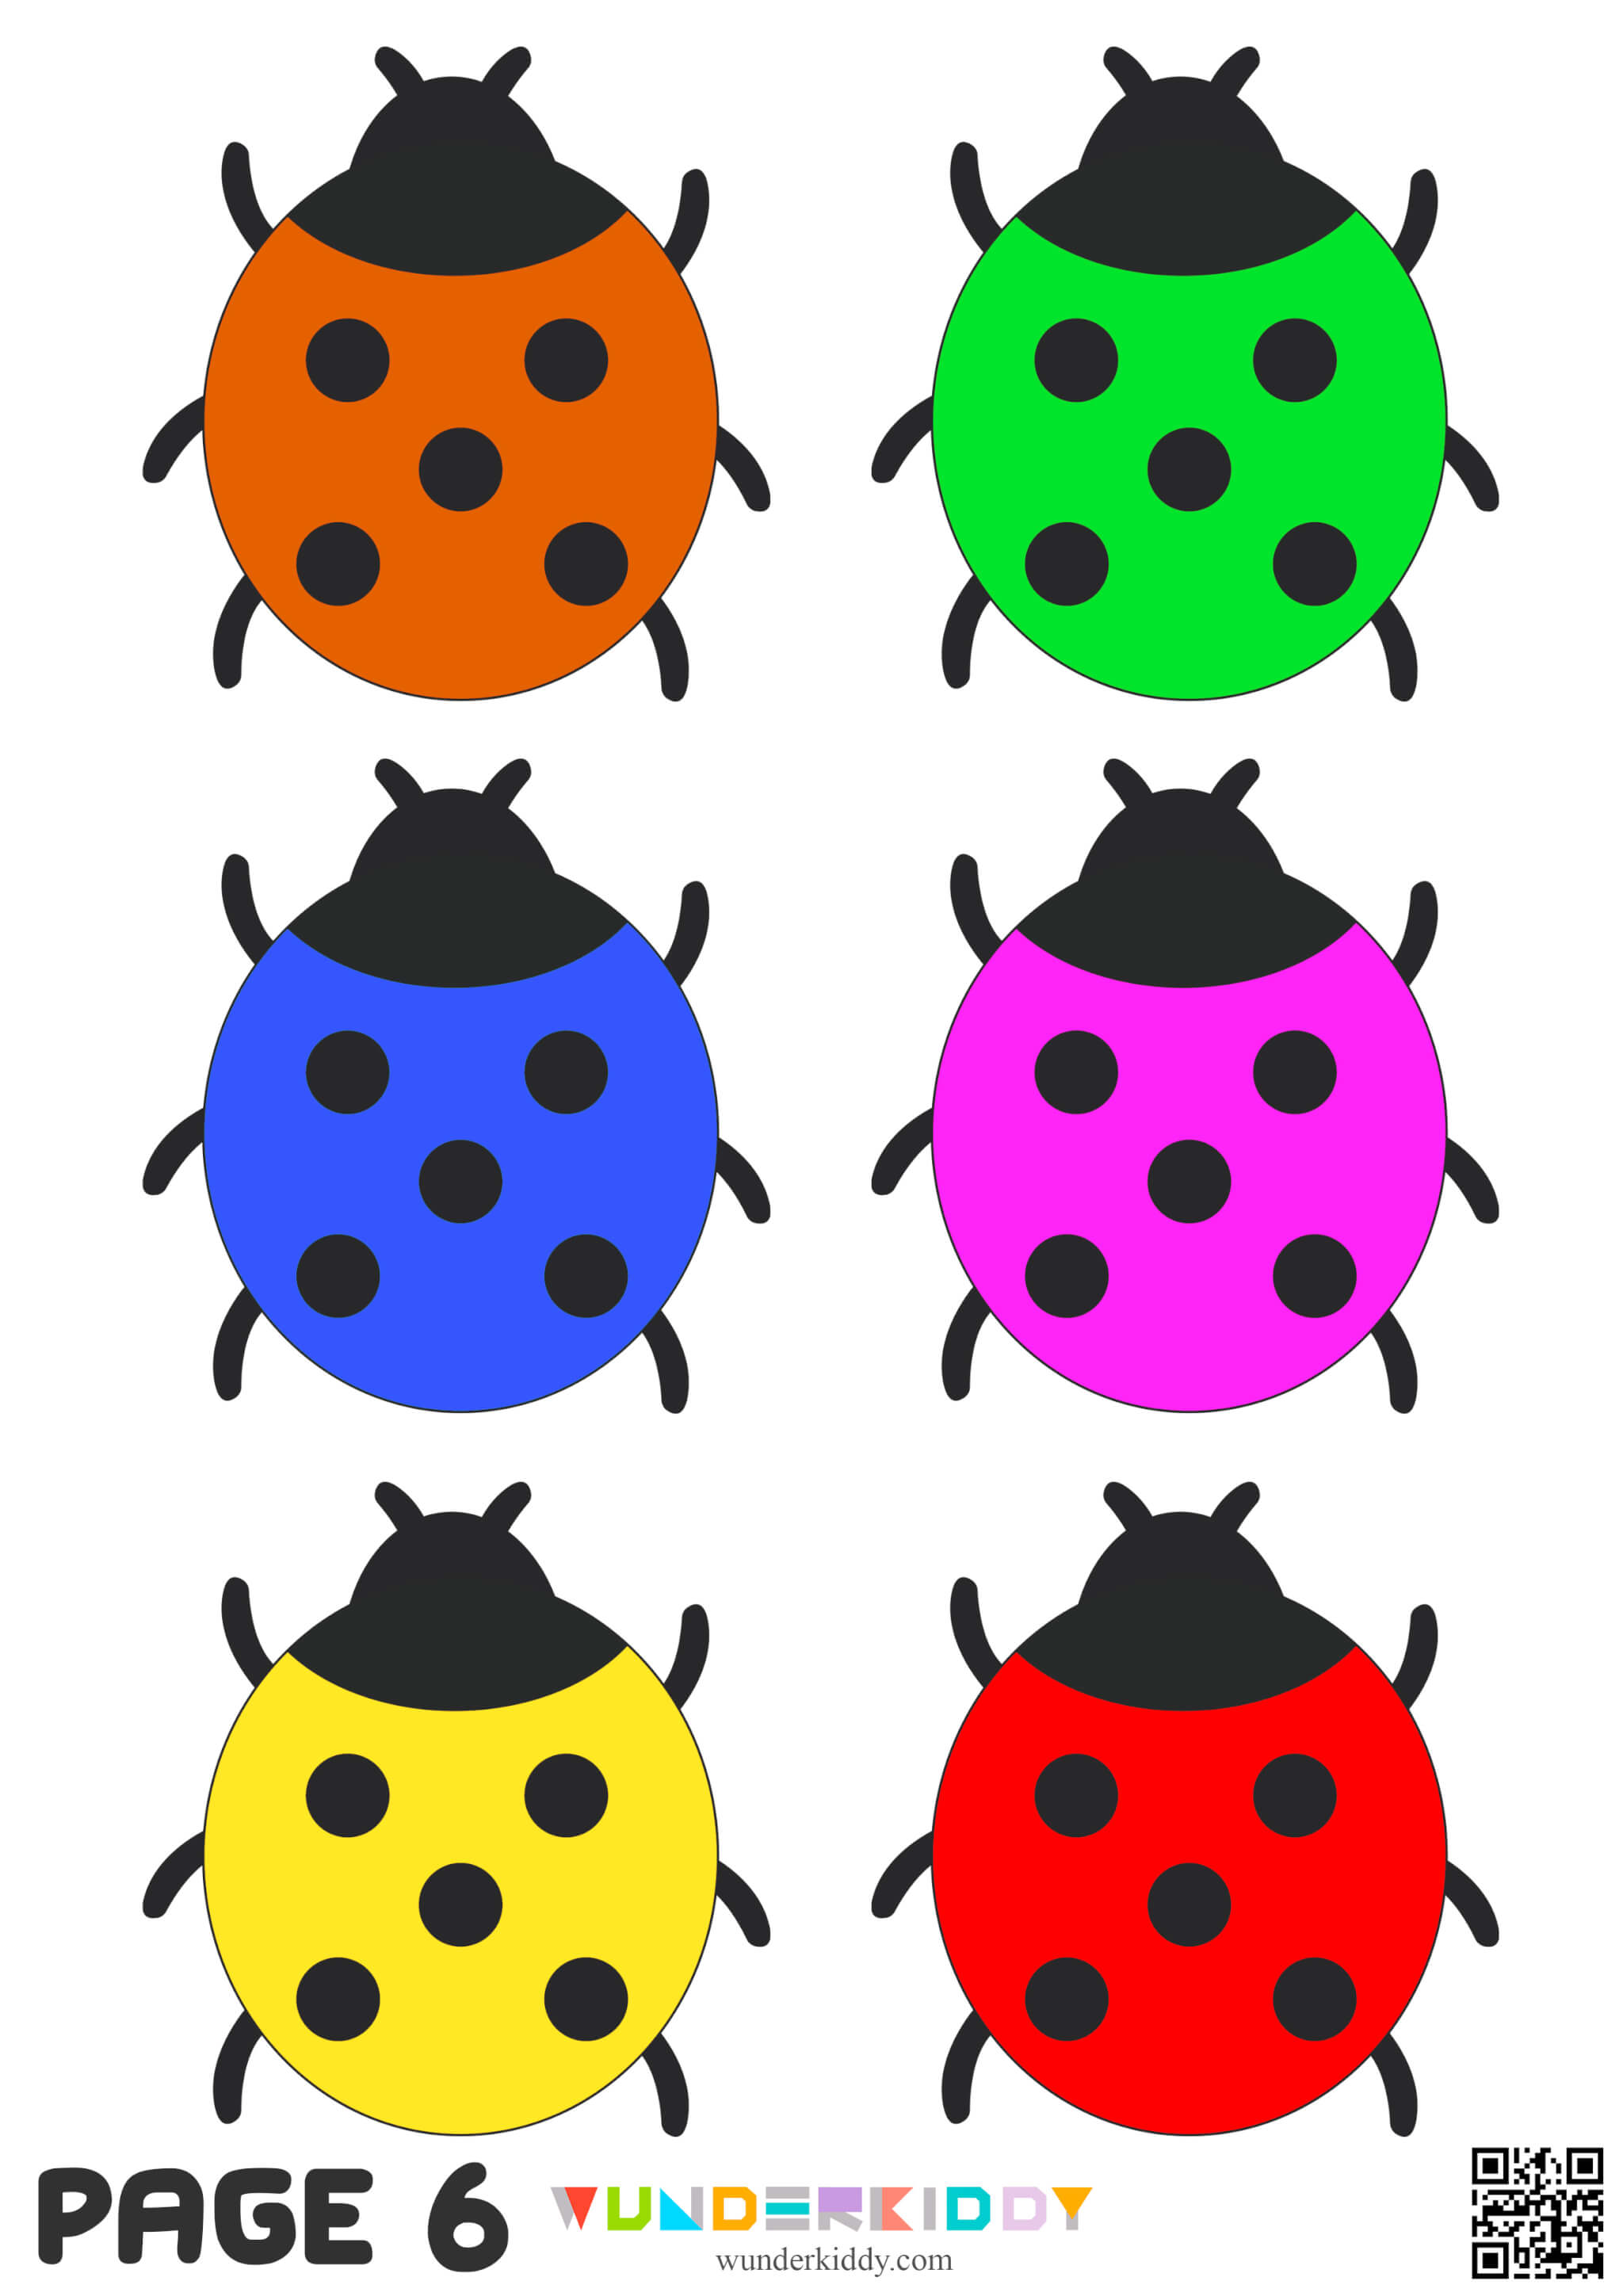 Ladybug Activity and Templates for Kids - Image 7